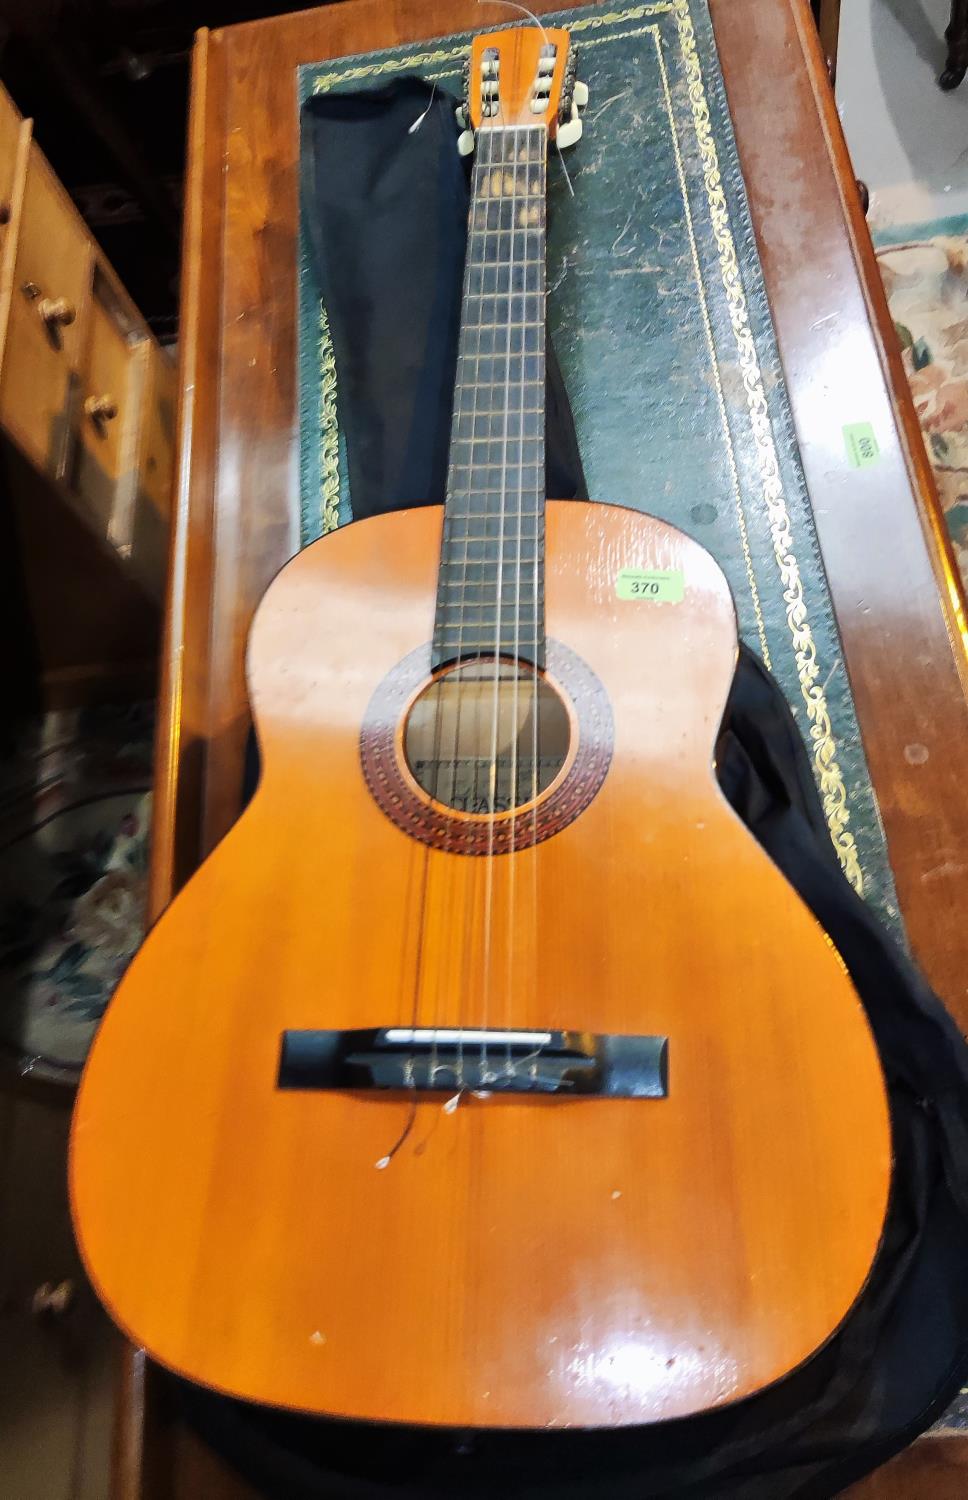 A Tatra Classic nylon string guitar, a Monet print and other pictures